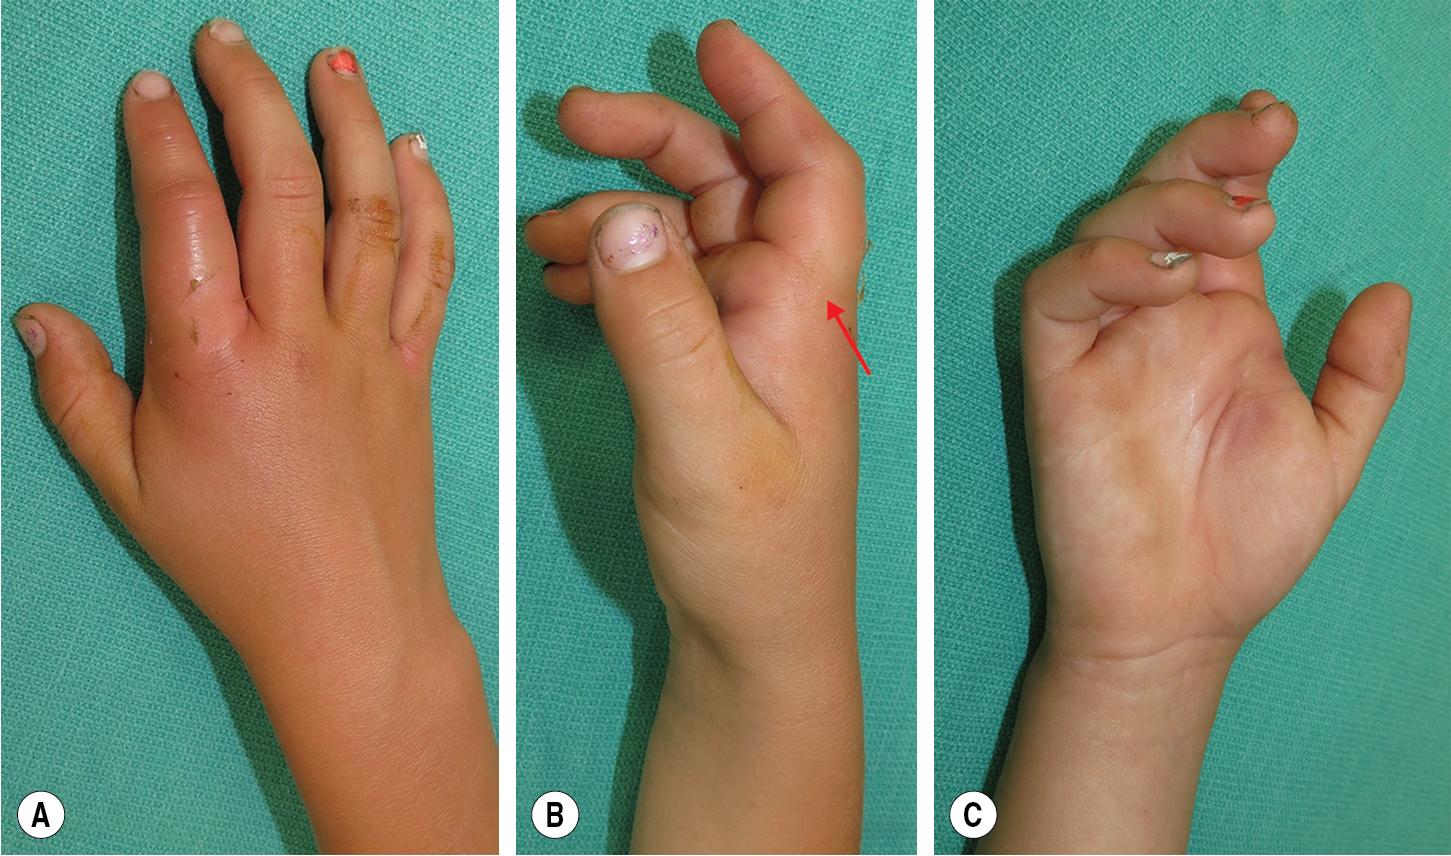 FIGURE 15.1, Complex dislocation of the index finger results in a swollen digit held in extension. Notice that there is no substantial metacarpophalangeal (MCP) joint hyperextension in complex dislocations ( red arrow ).